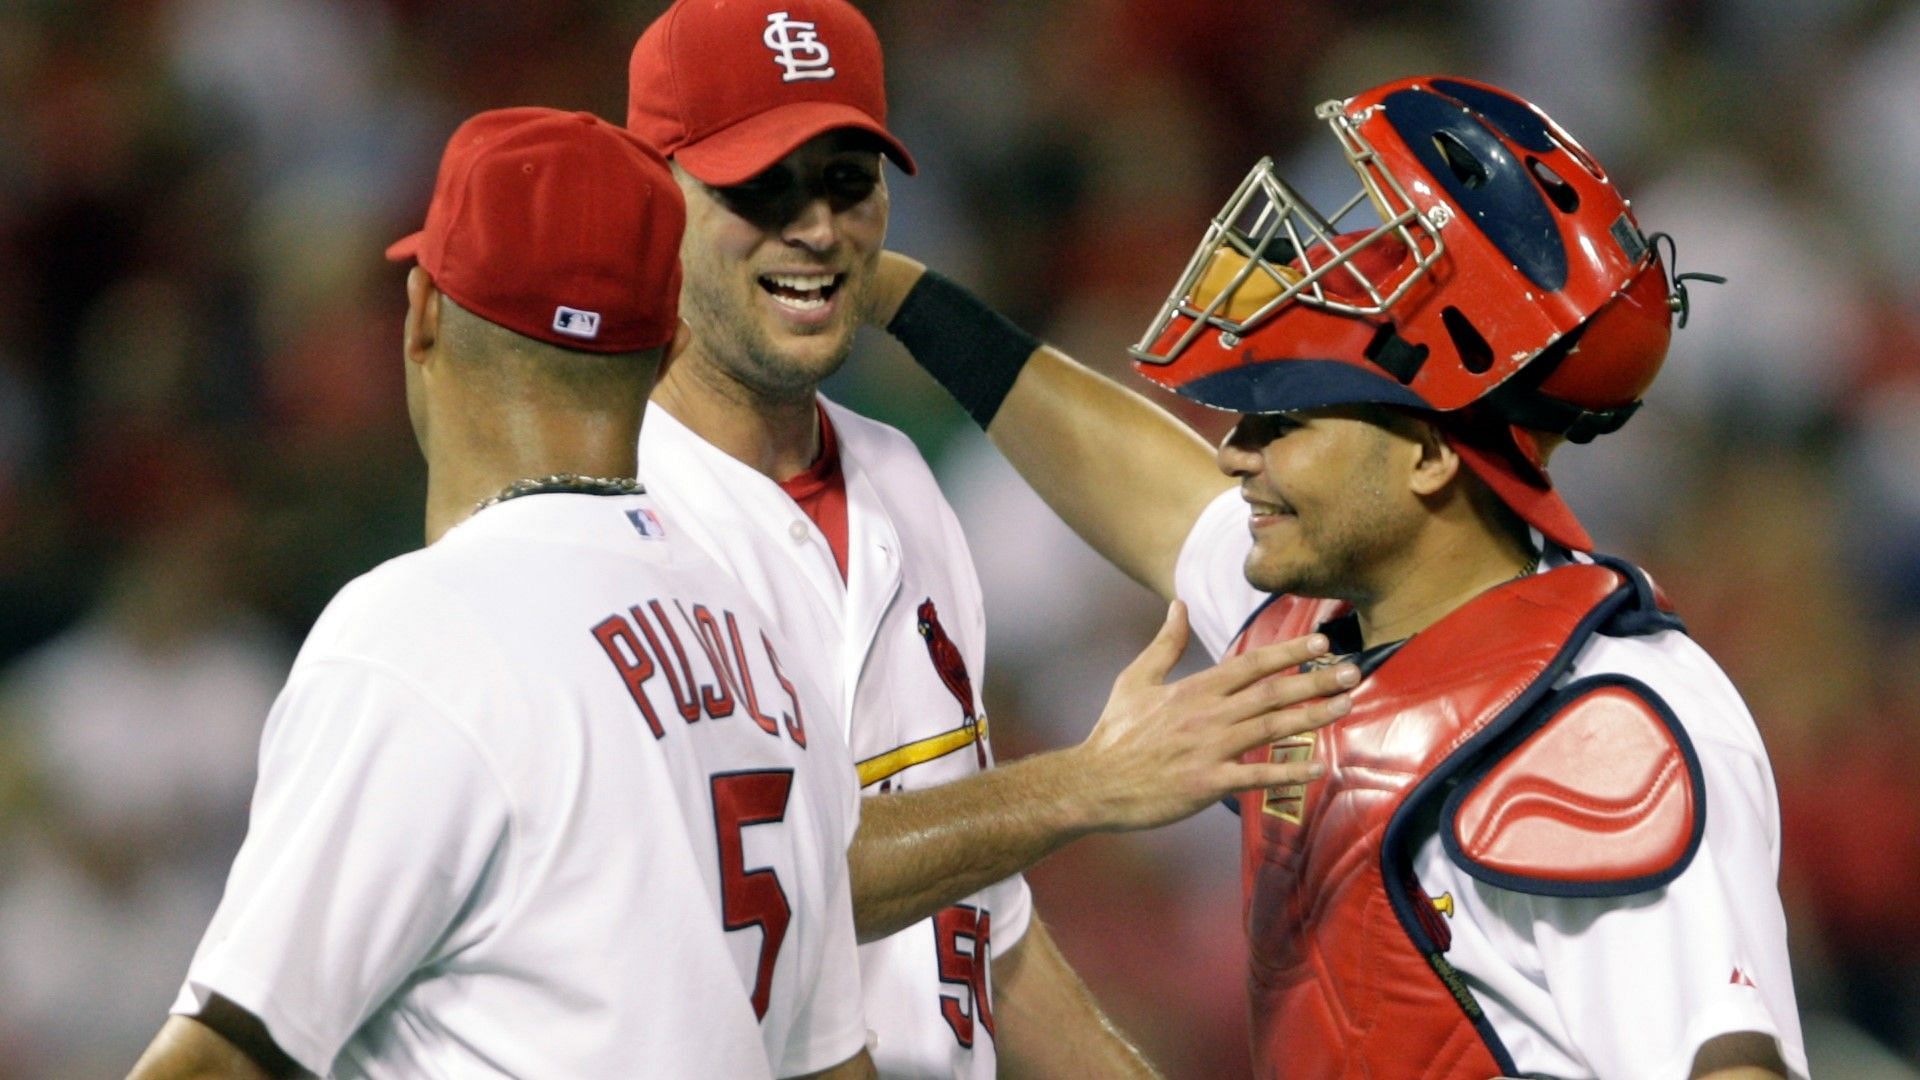 Albert Pujols (left), Adam Wainwright (middle), and Yadier Molina (right) all plan to retire after 2022 MLB season